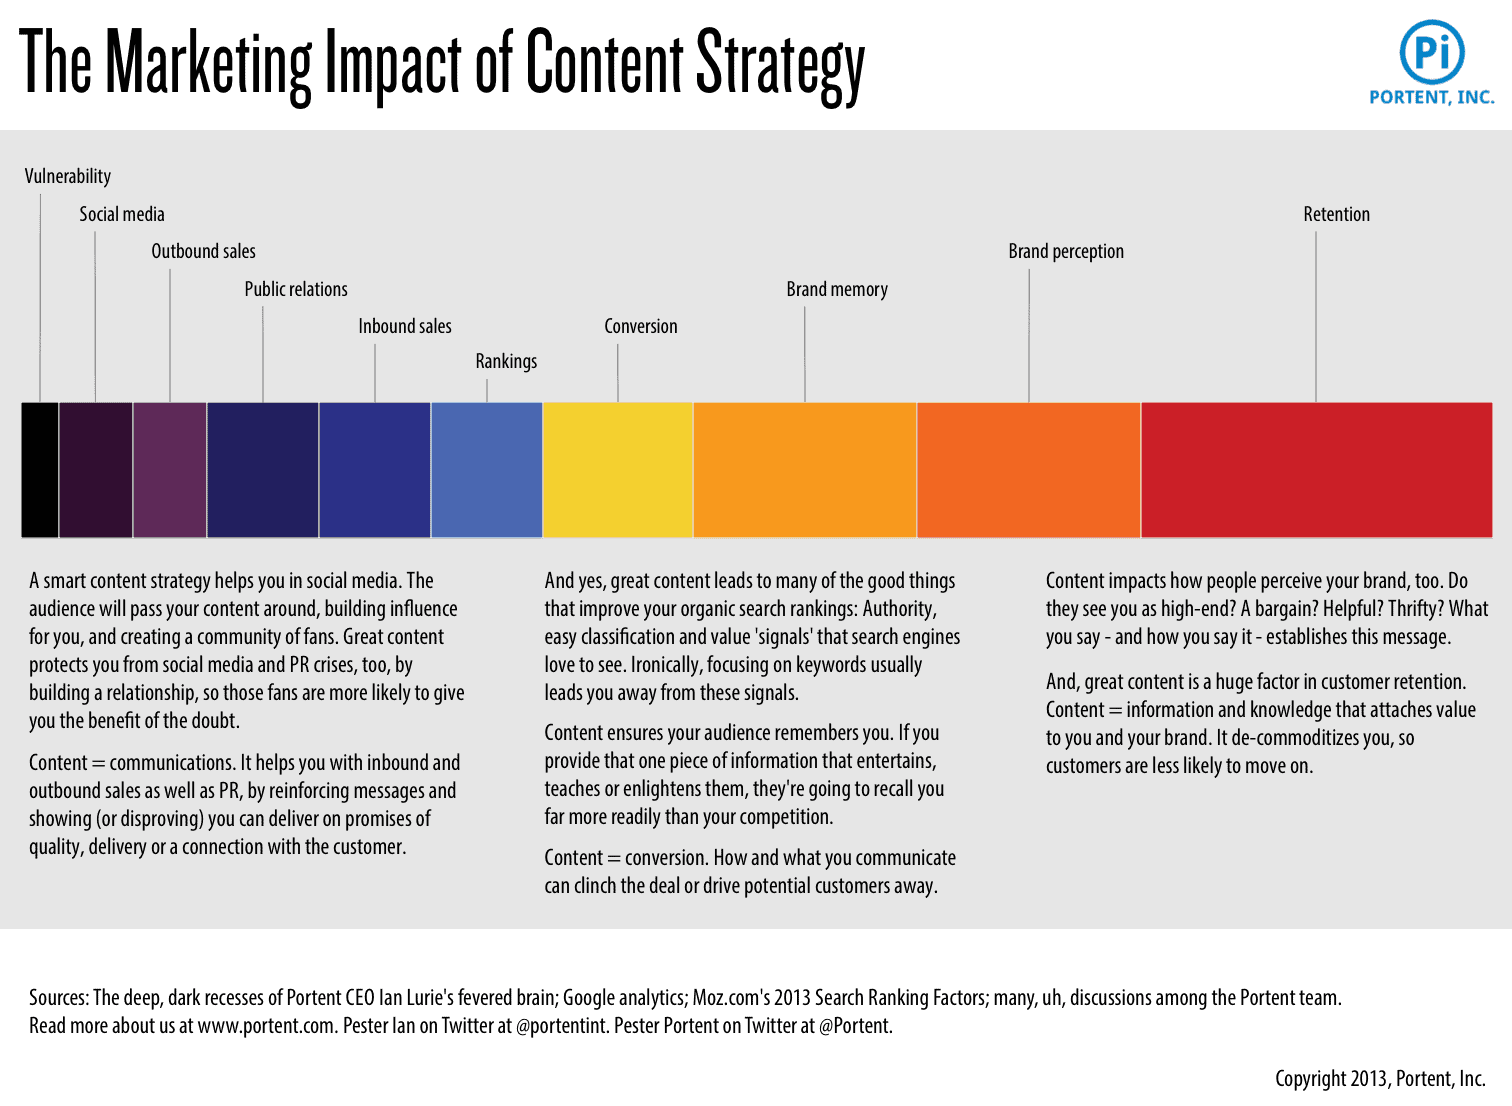 content marketing strategy impact